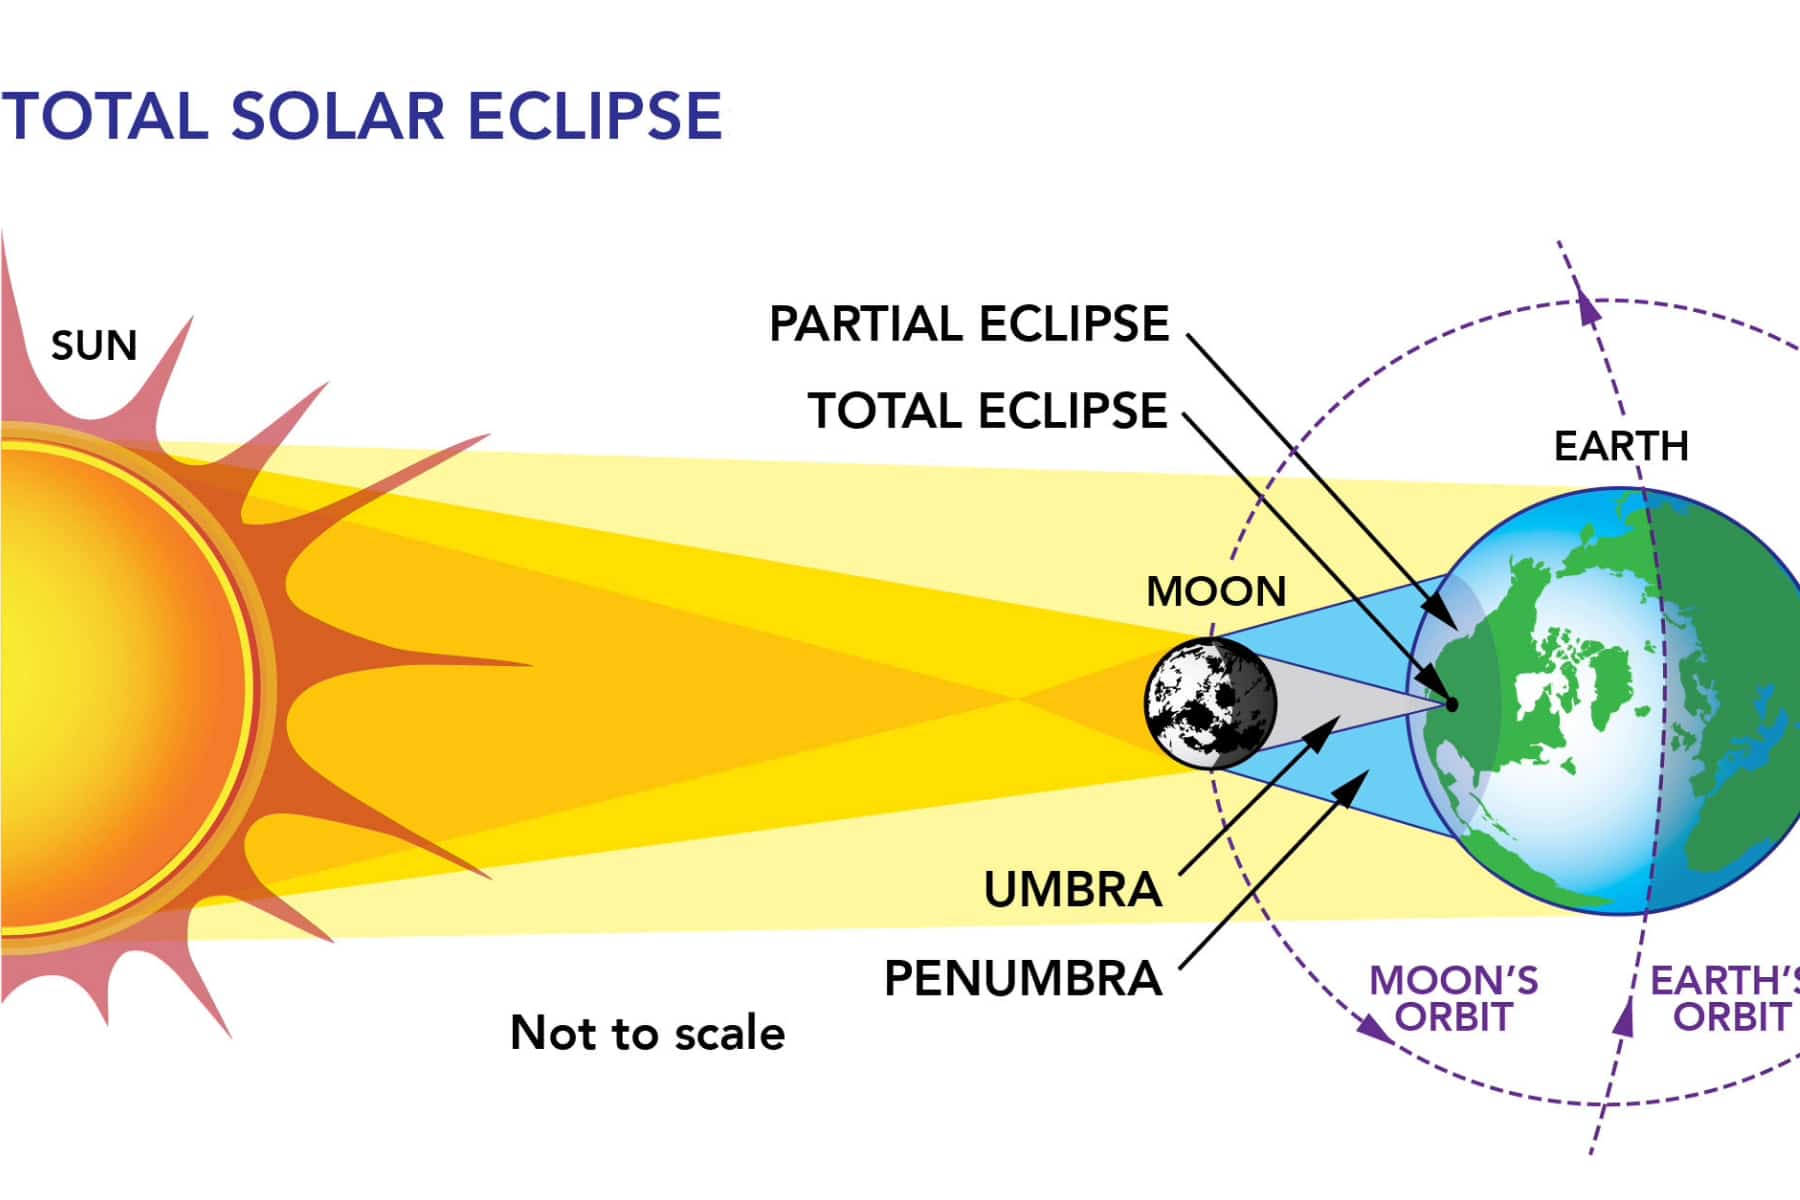 A NASA Graphic showing how the sun hits the moon and the moon casts a shadow on the earth during a solar eclipse.